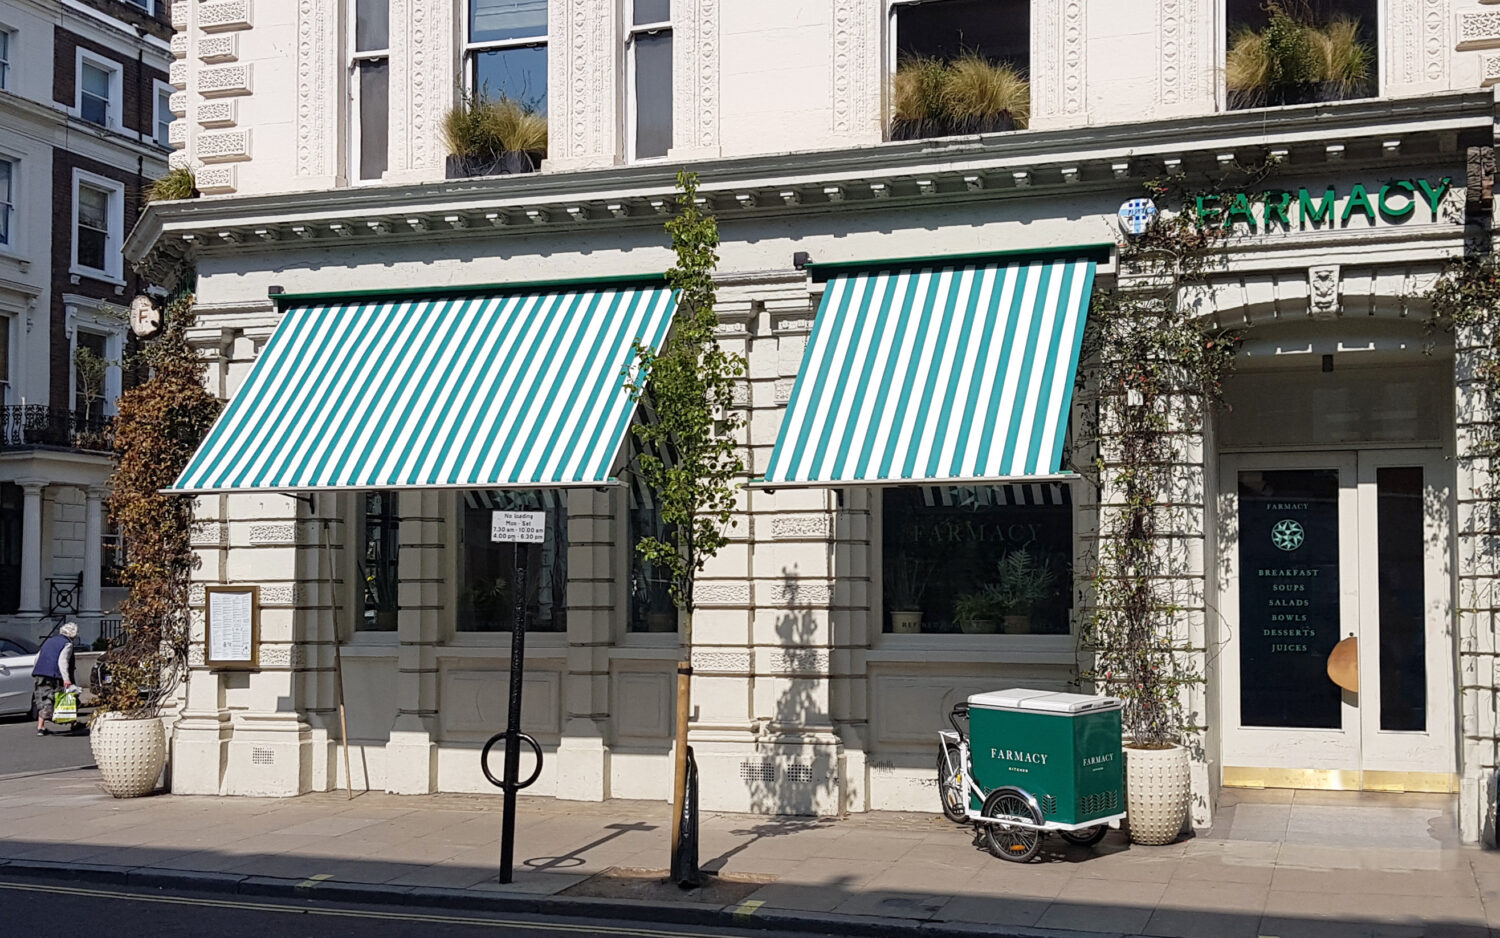 Victorian Awnings at Farmacy